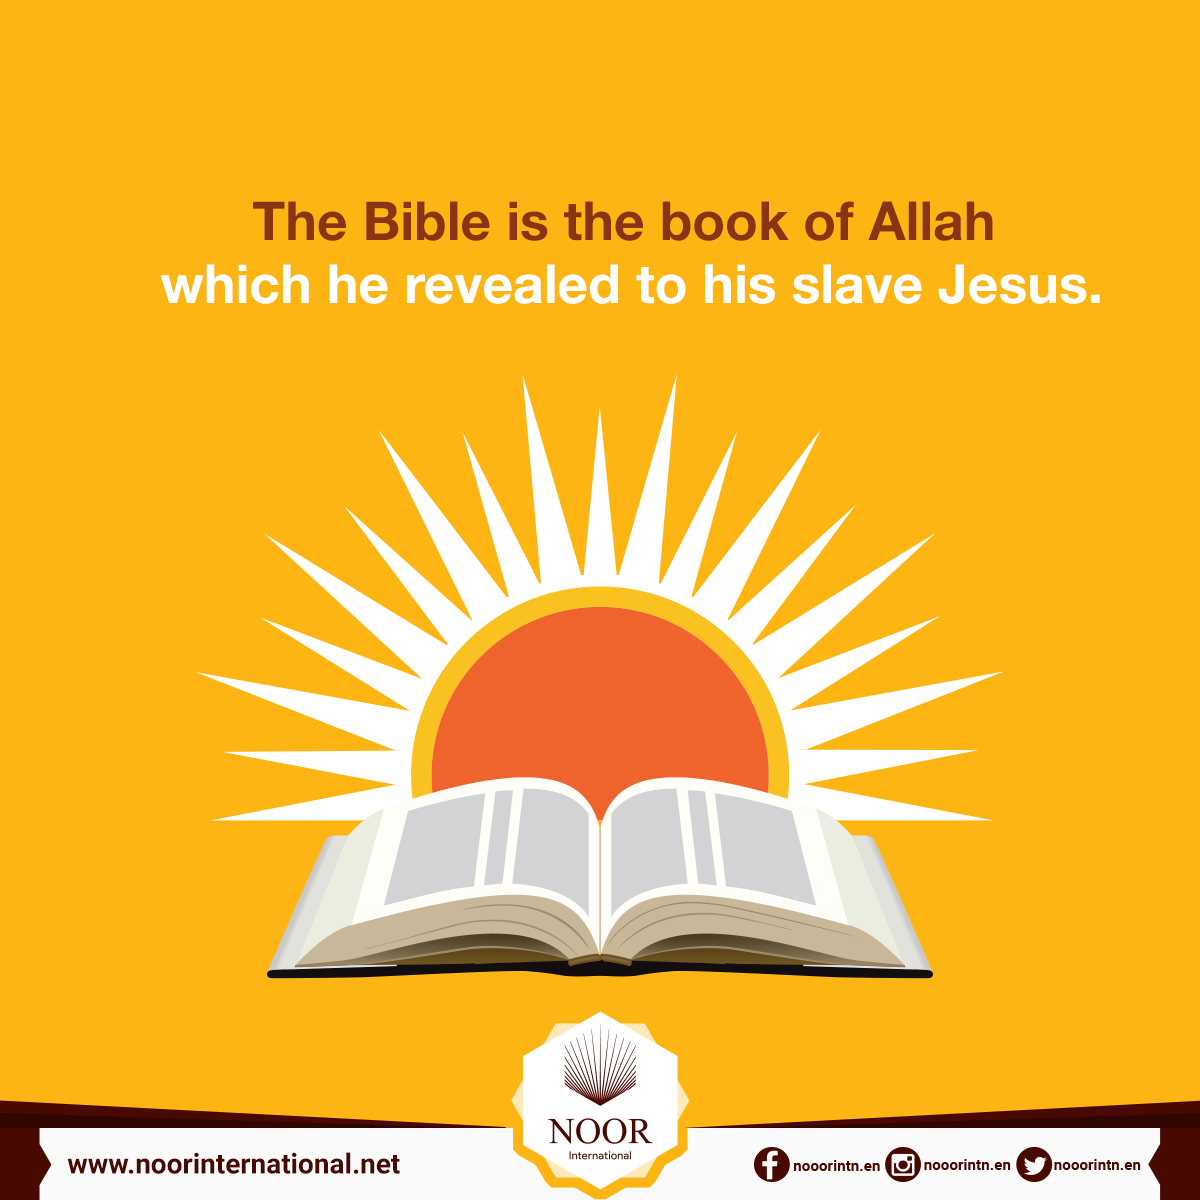 The Bible is the book of Allah which he revealed to his slave Jesus.